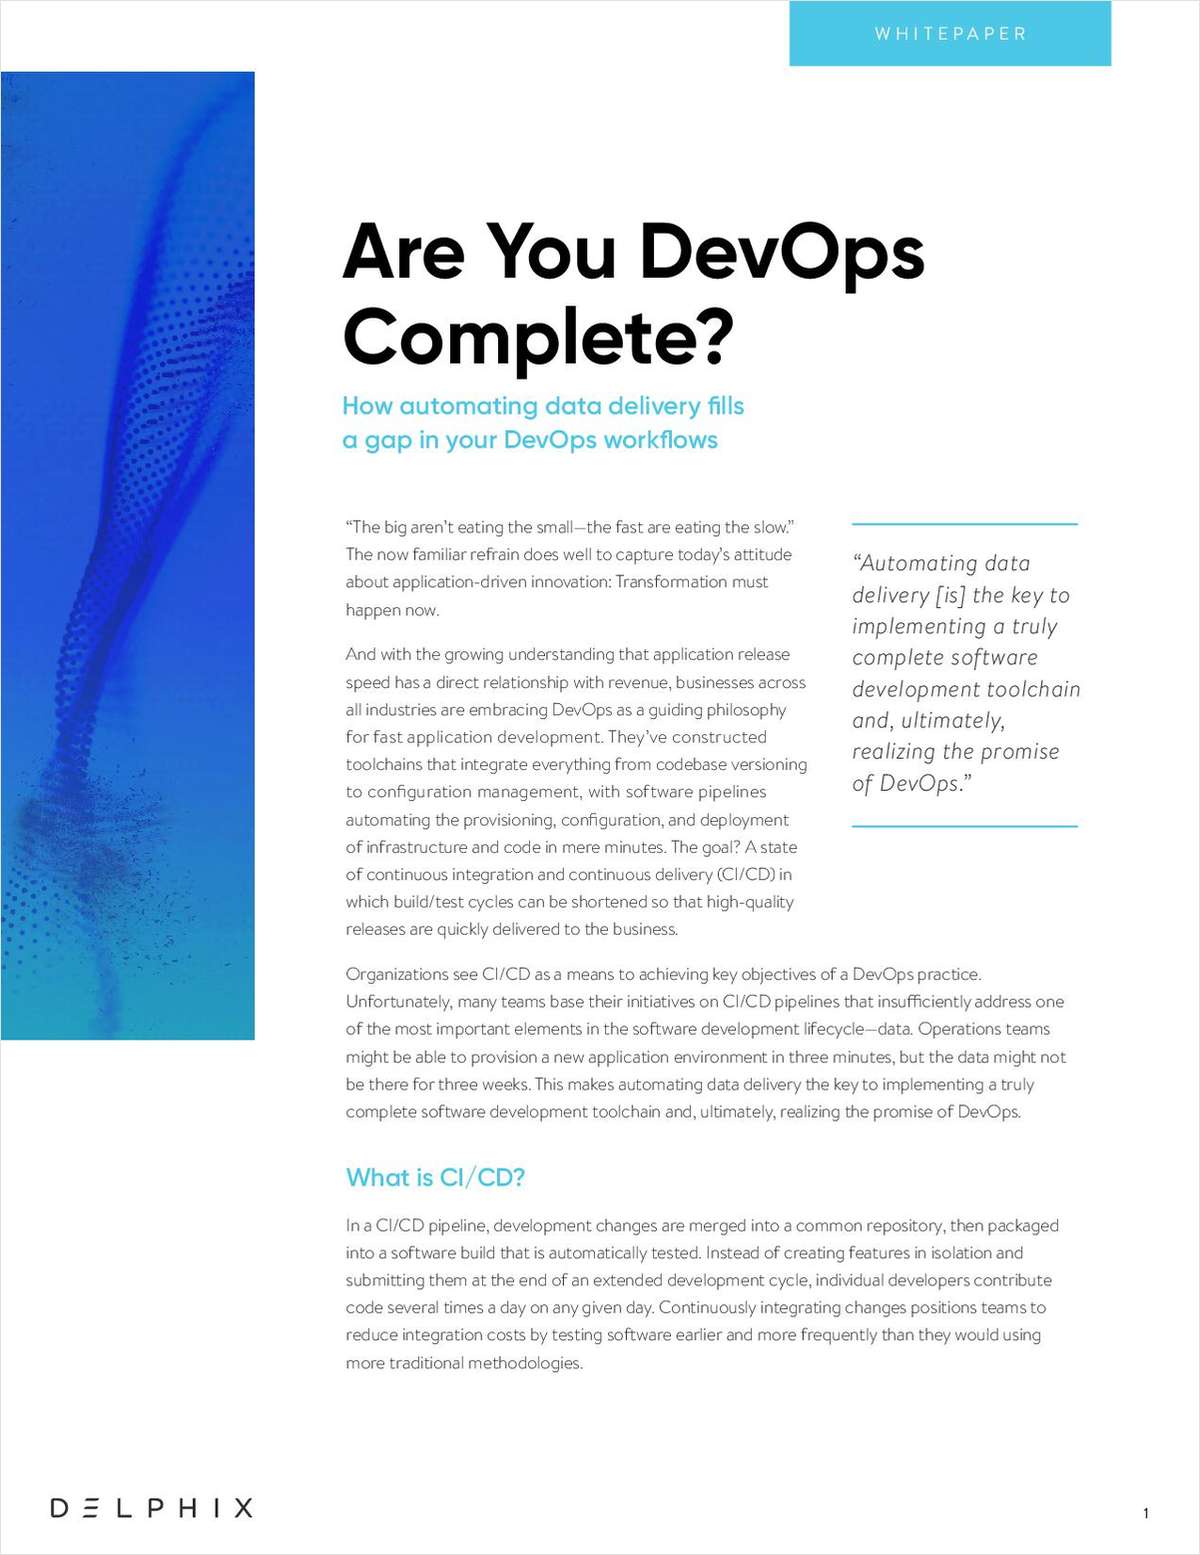 Are You DevOps Complete?